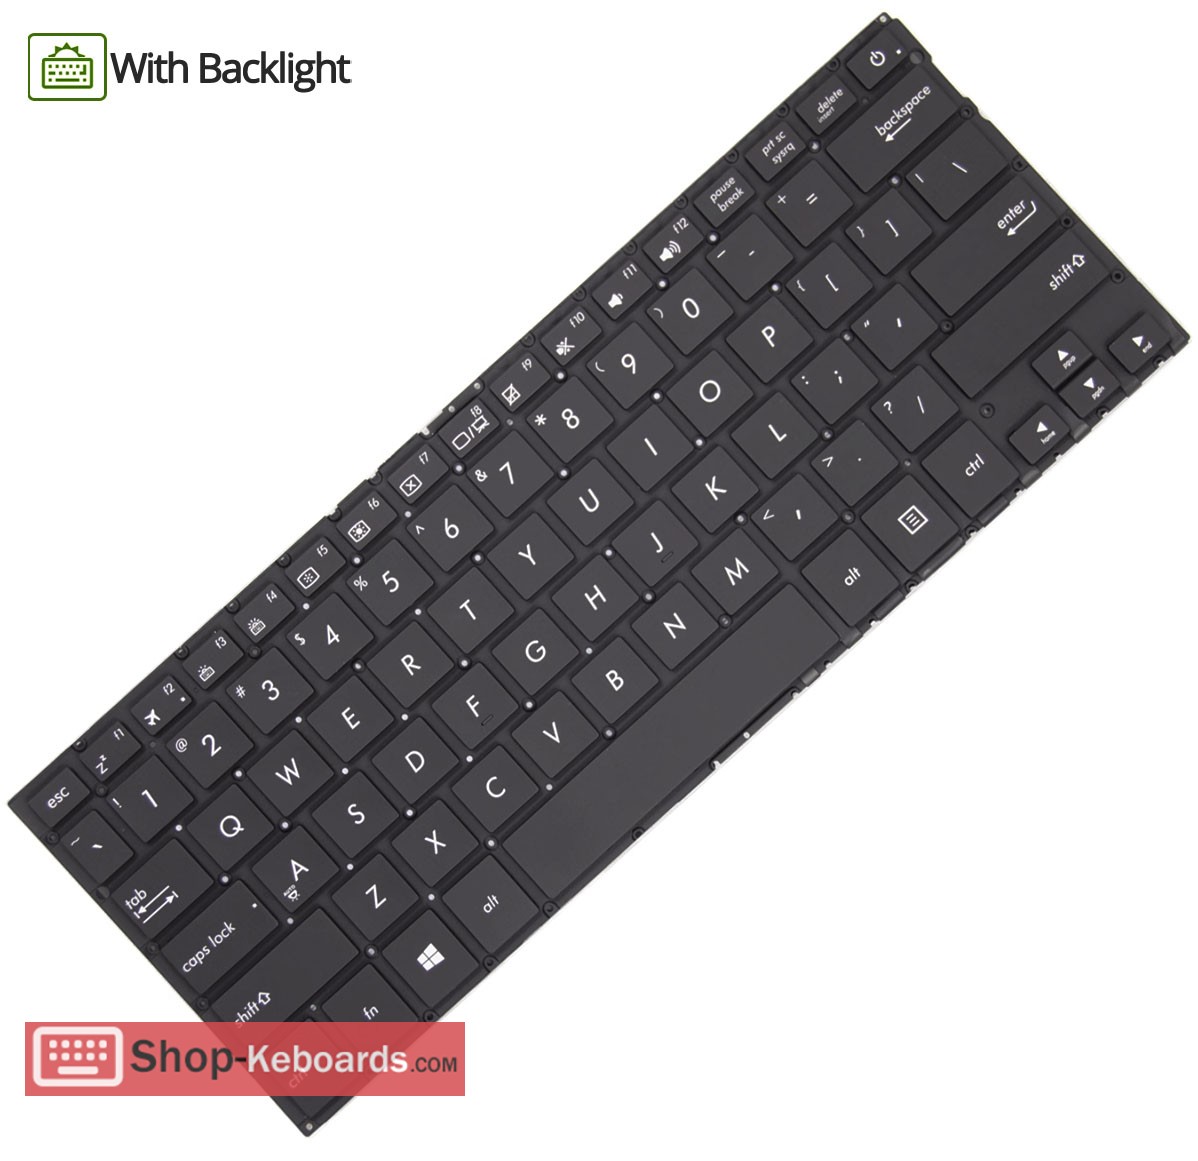 Asus 0KNB0-2627IT00 Keyboard replacement